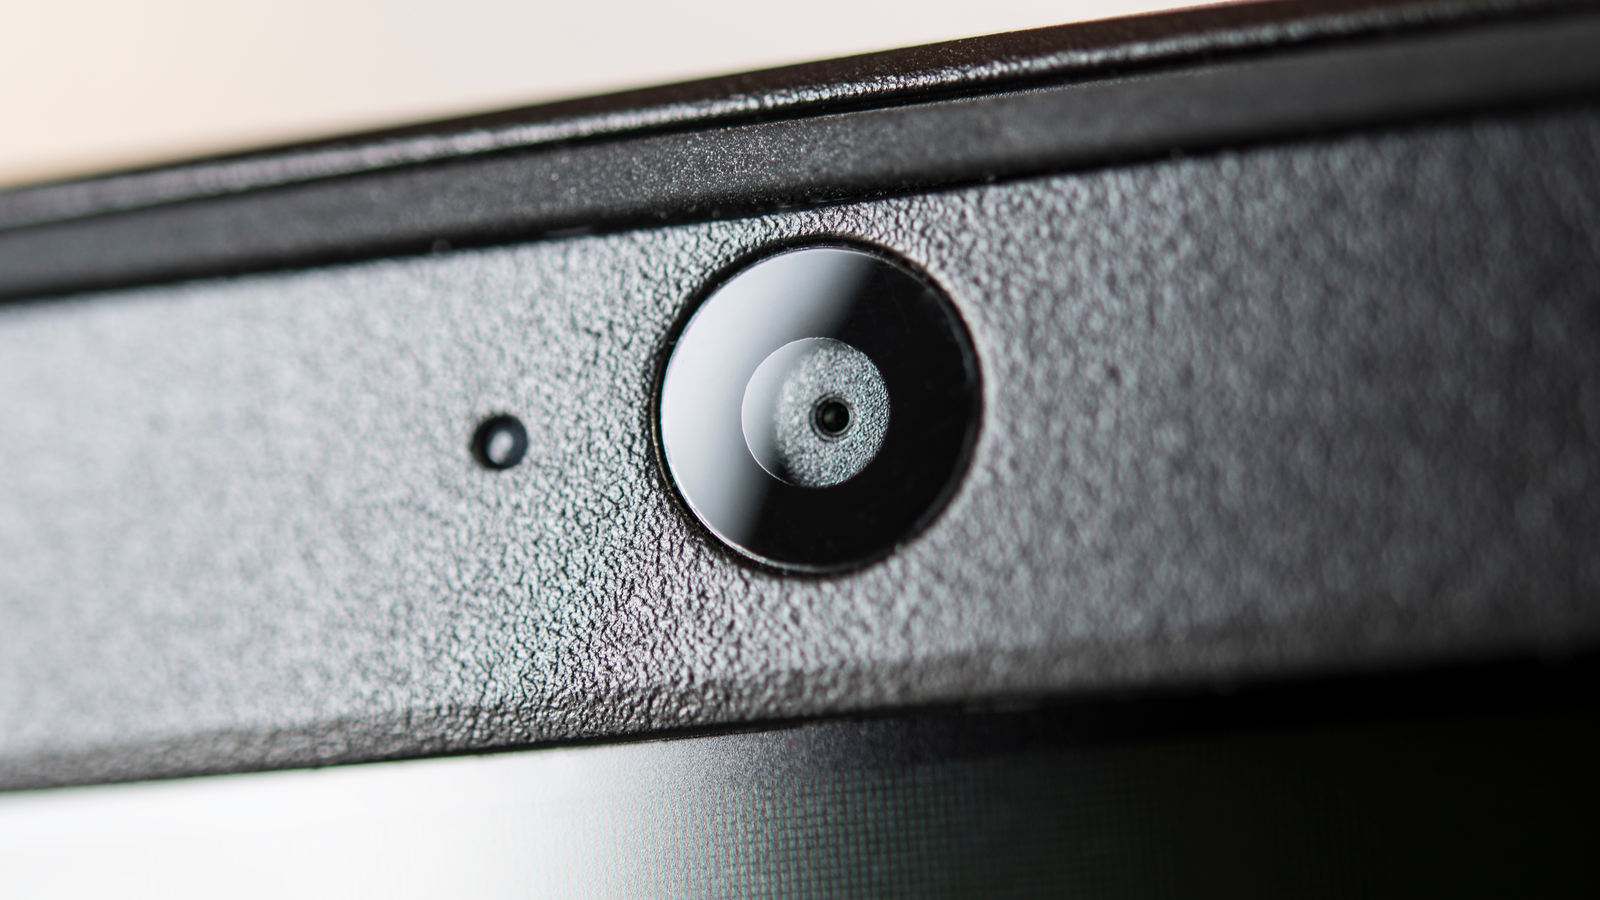 Close up shot of a built-in camera on a laptop